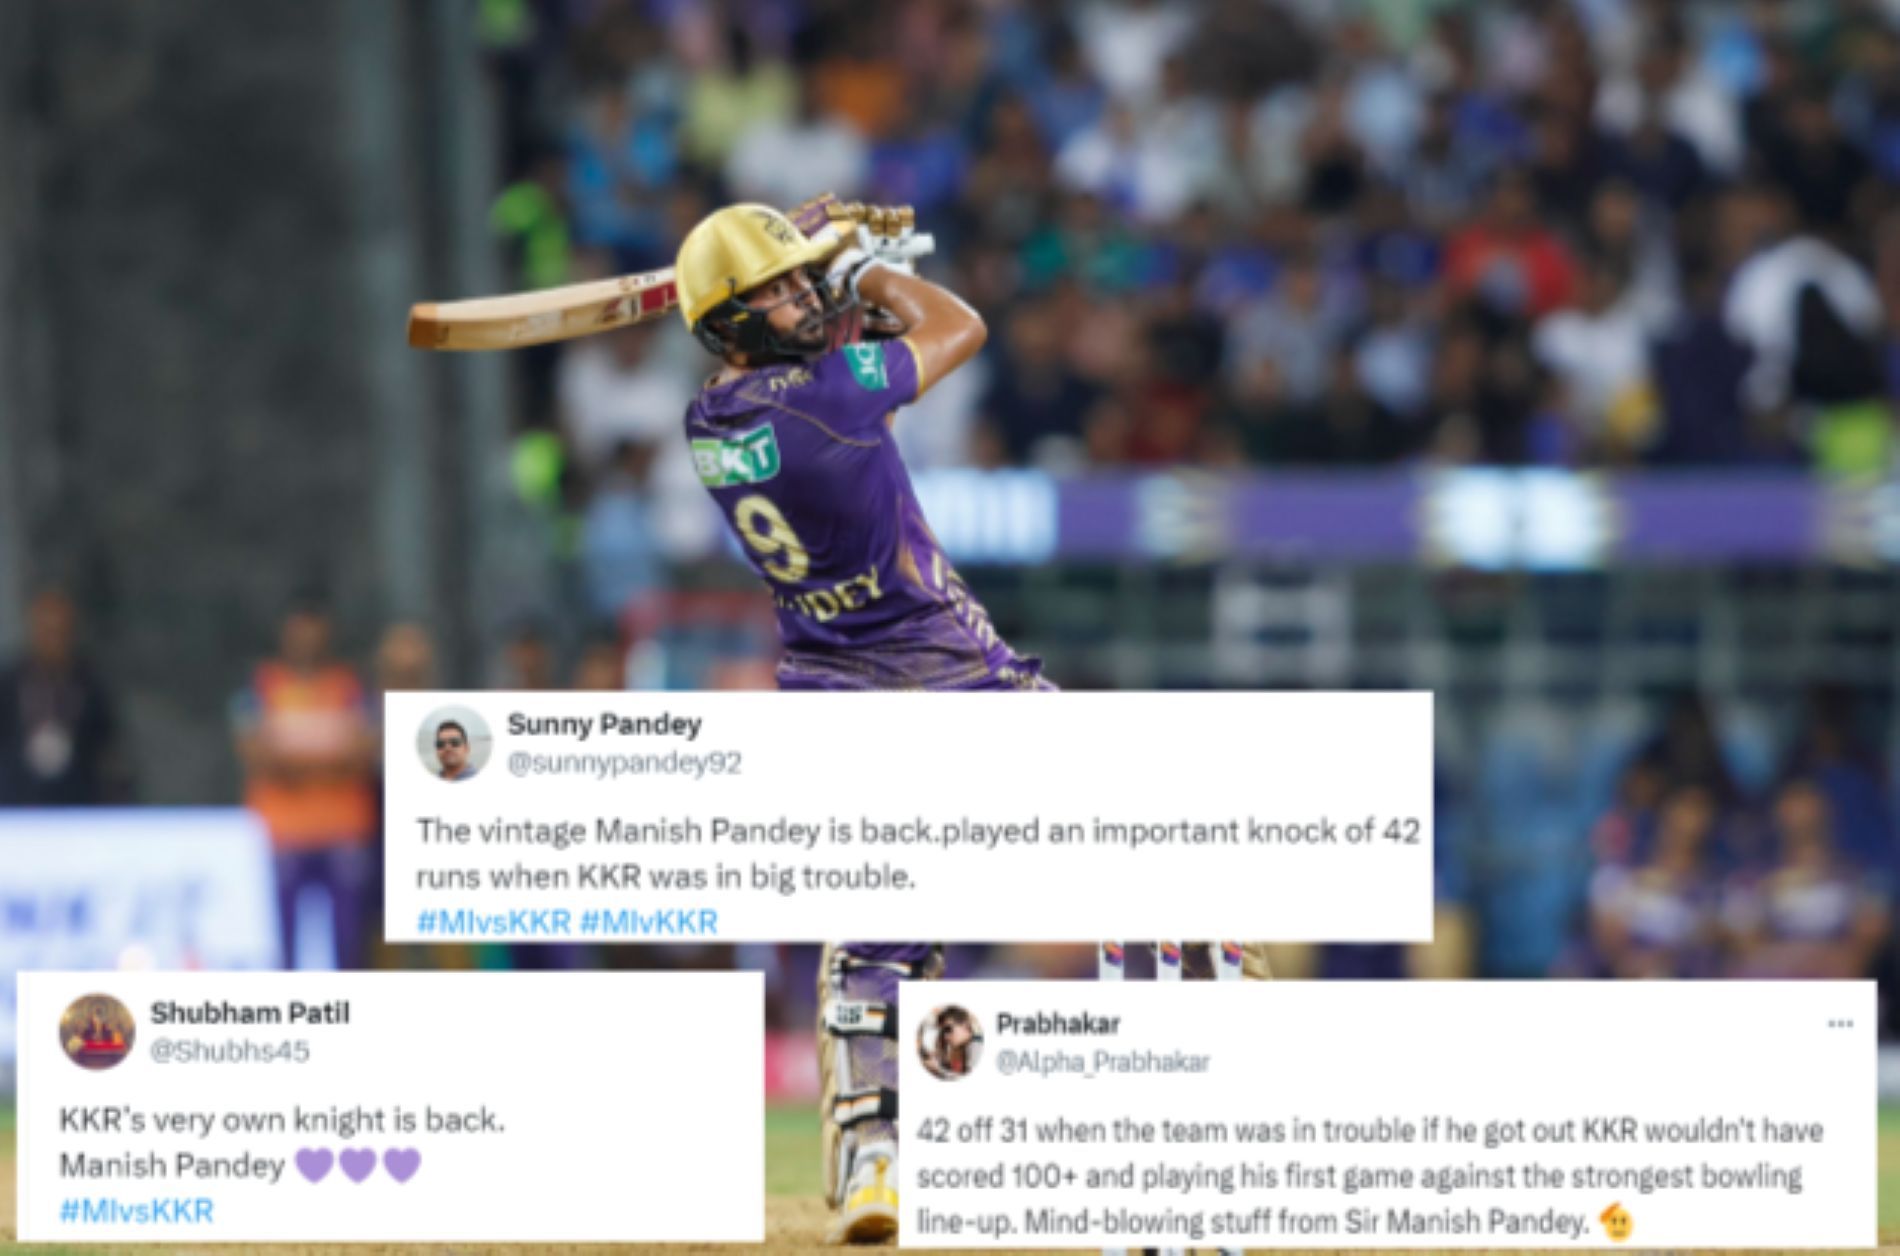 Pandey saved KKR from a batting collapse against MI [Credit: KKR Twitter handle]